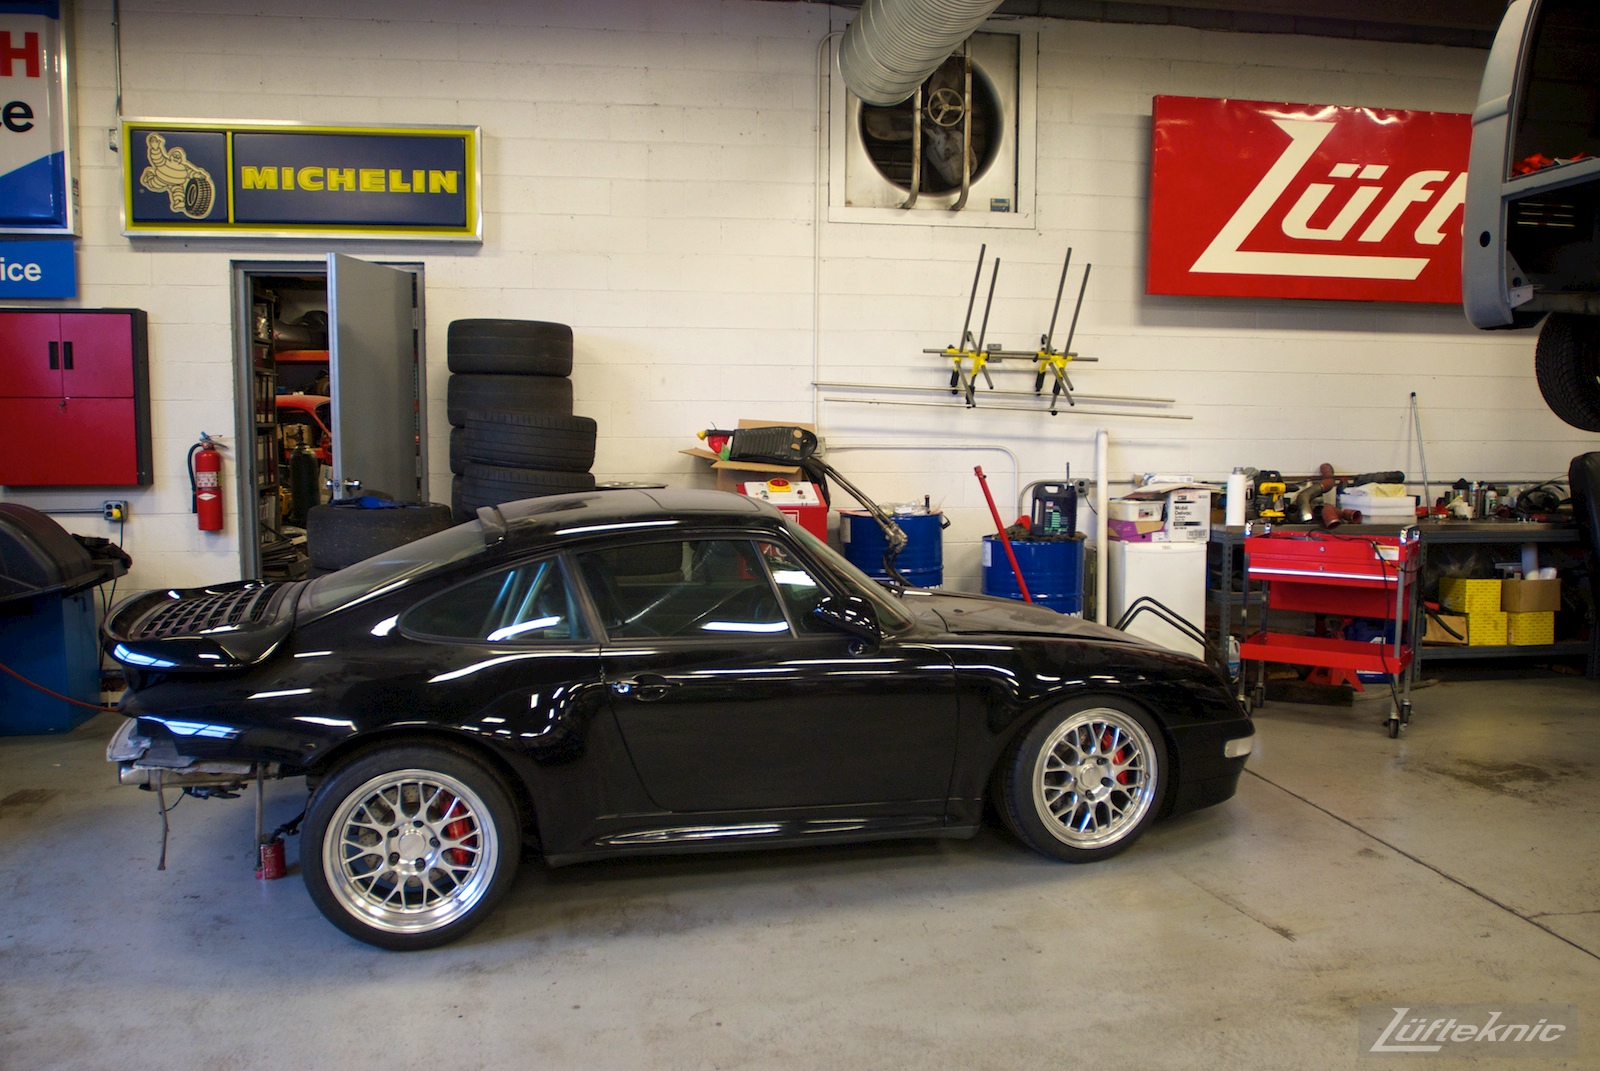 A black 993 Turbo sitting in the Lufteknic shop with the engine removed.